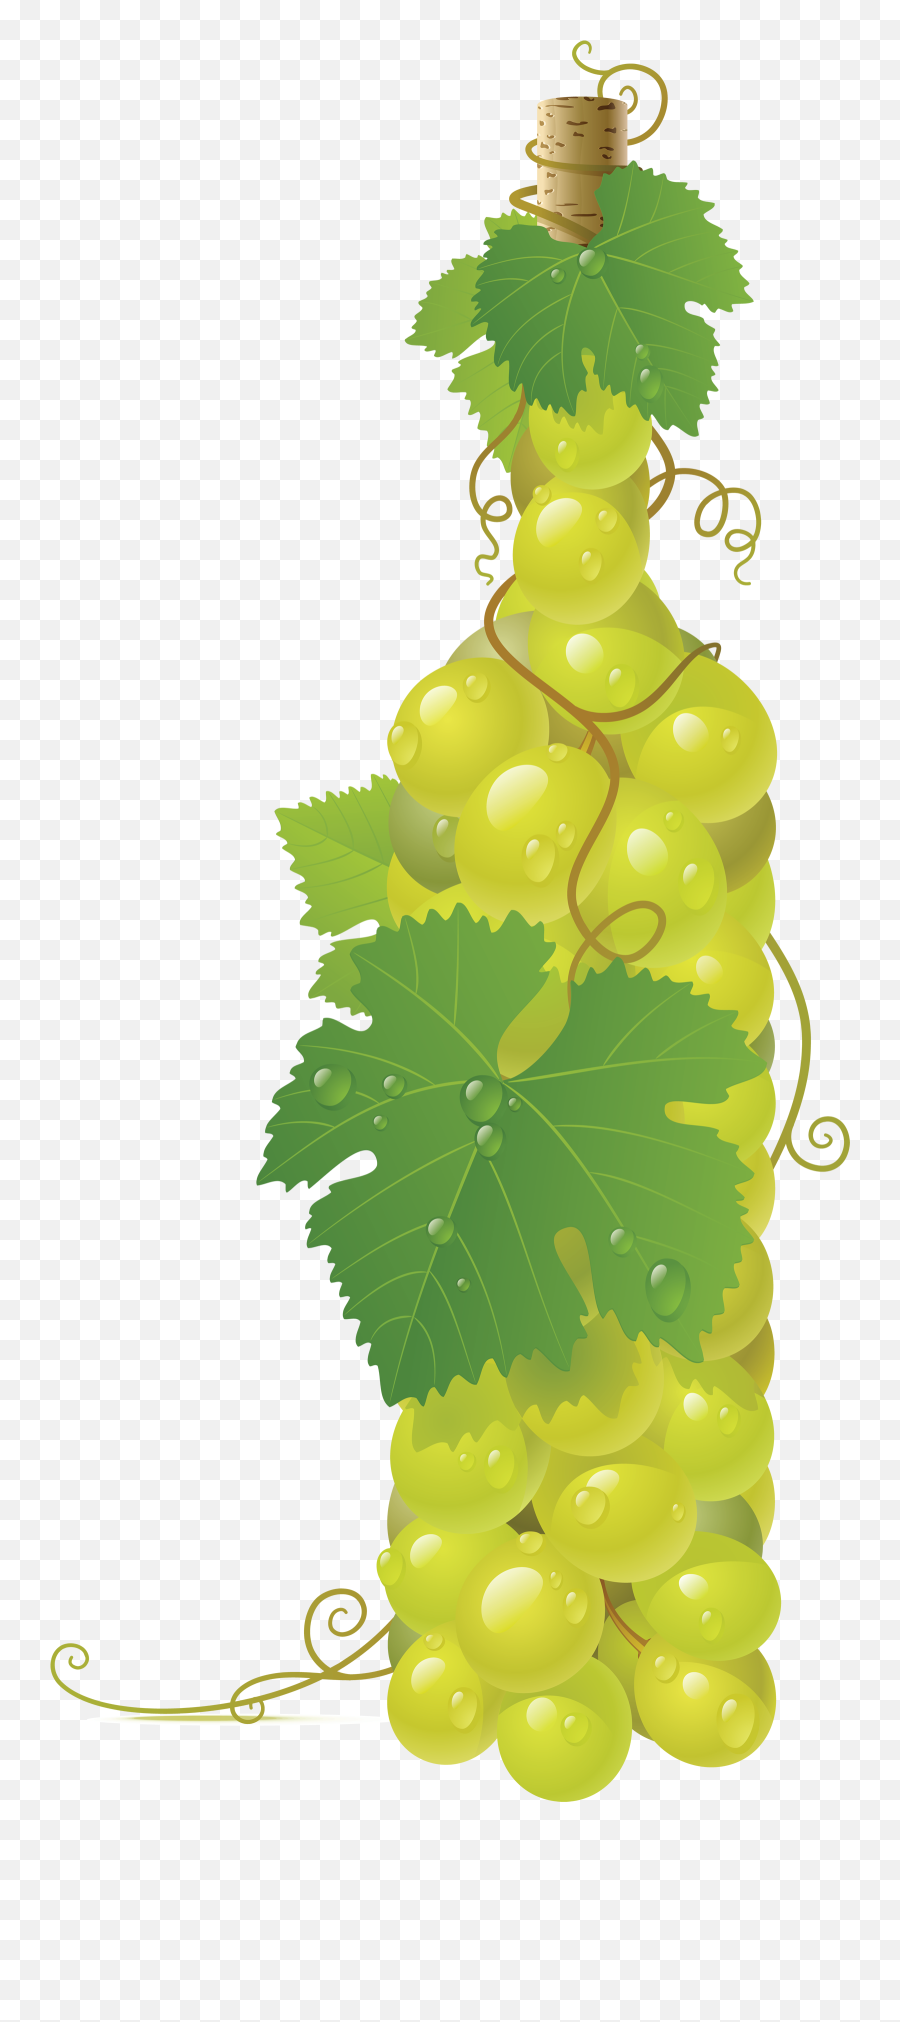 17 Best Green Grapes Ideas Green Grapes Grapes Green - Wine Bottle With Grapes Green Emoji,Facebook Emoticons Grapes